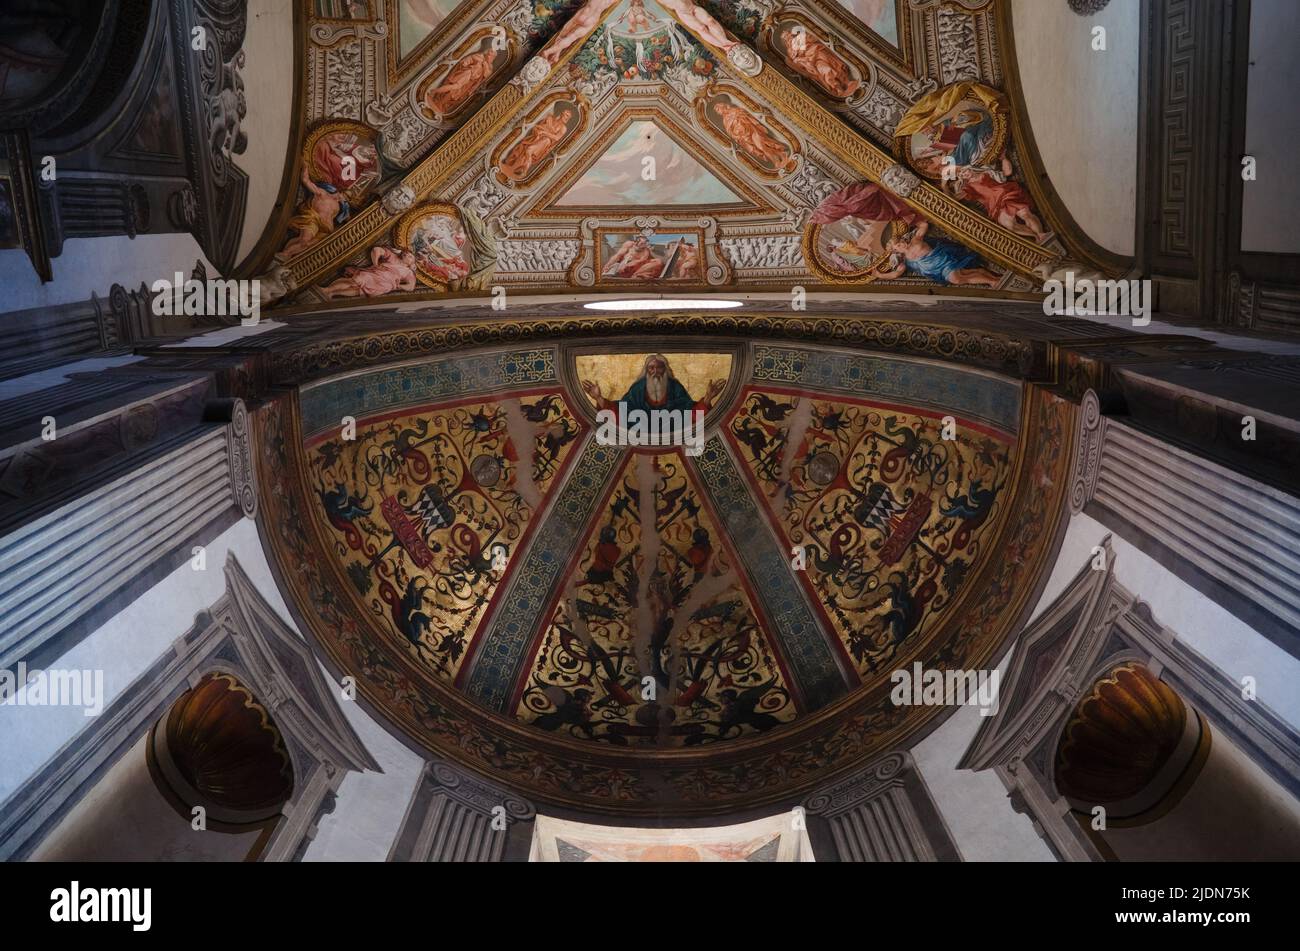 Parma, Italy - May, 2022: Frescoes in Parma Cathedral called Cattedrale di Santa Maria Assunta. Renaissance fresco on ceiling of Cathedral of Parma Stock Photo